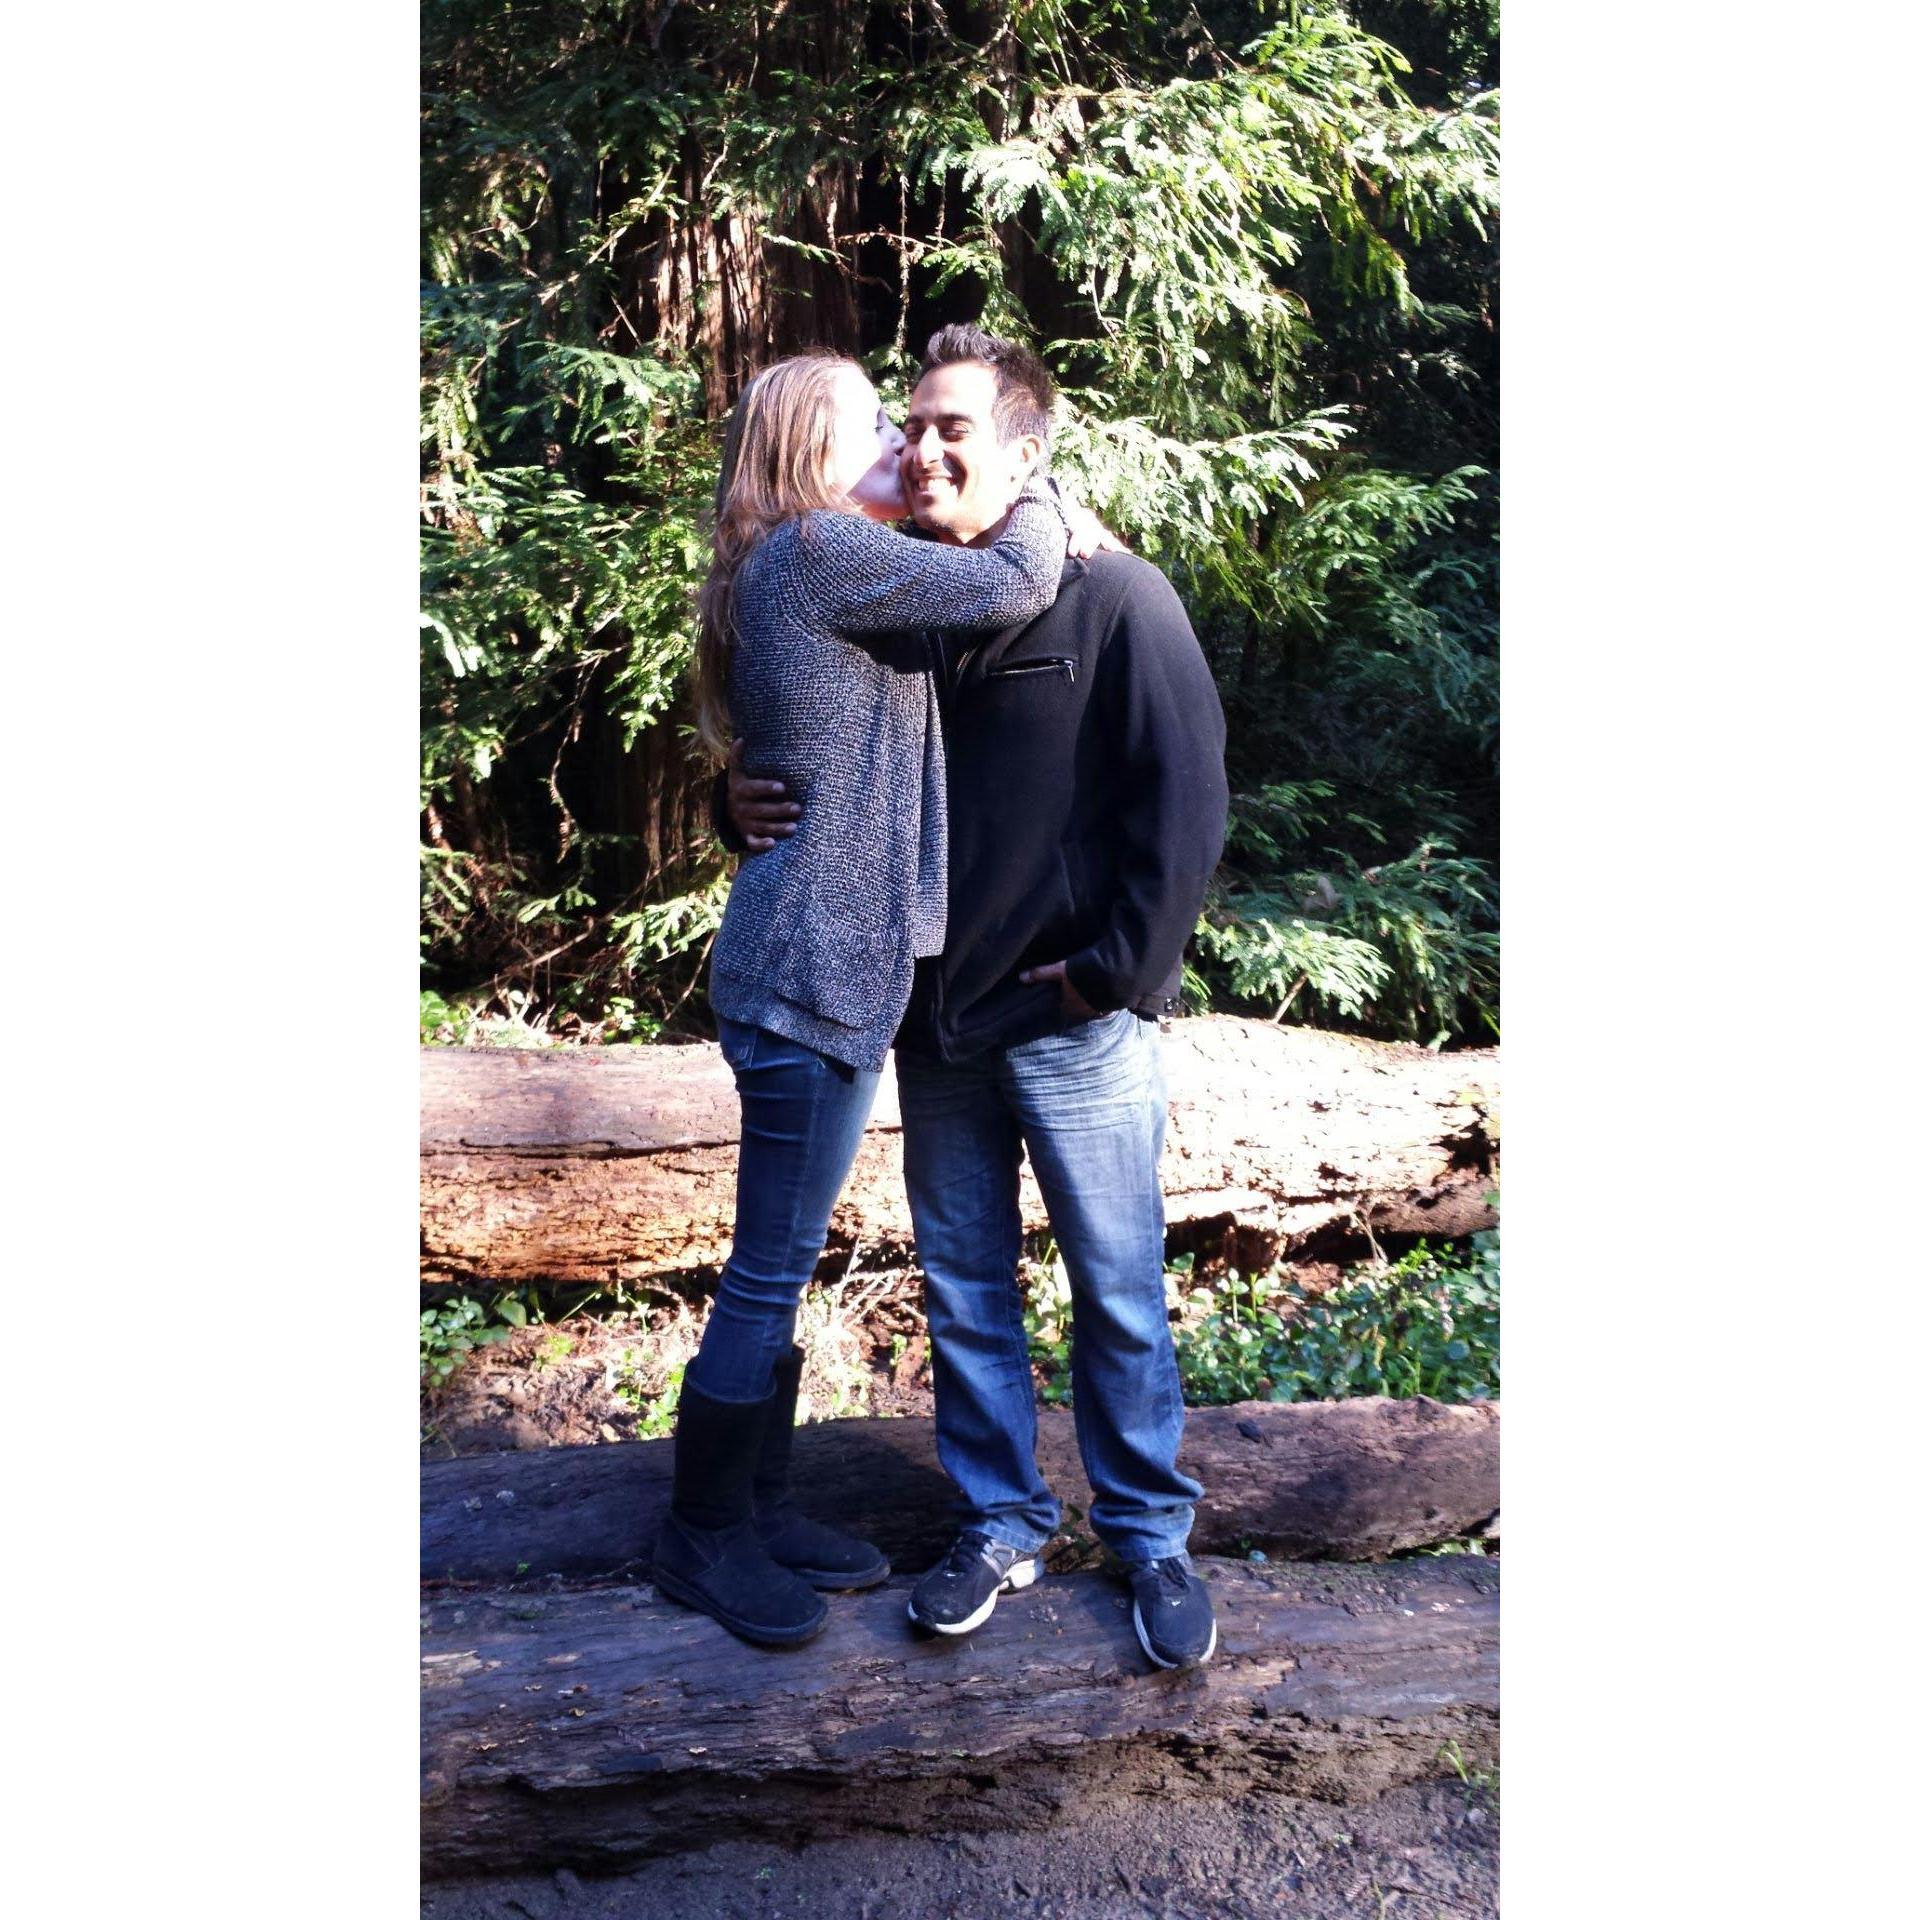 Love in the redwoods in Henry Cowell Park